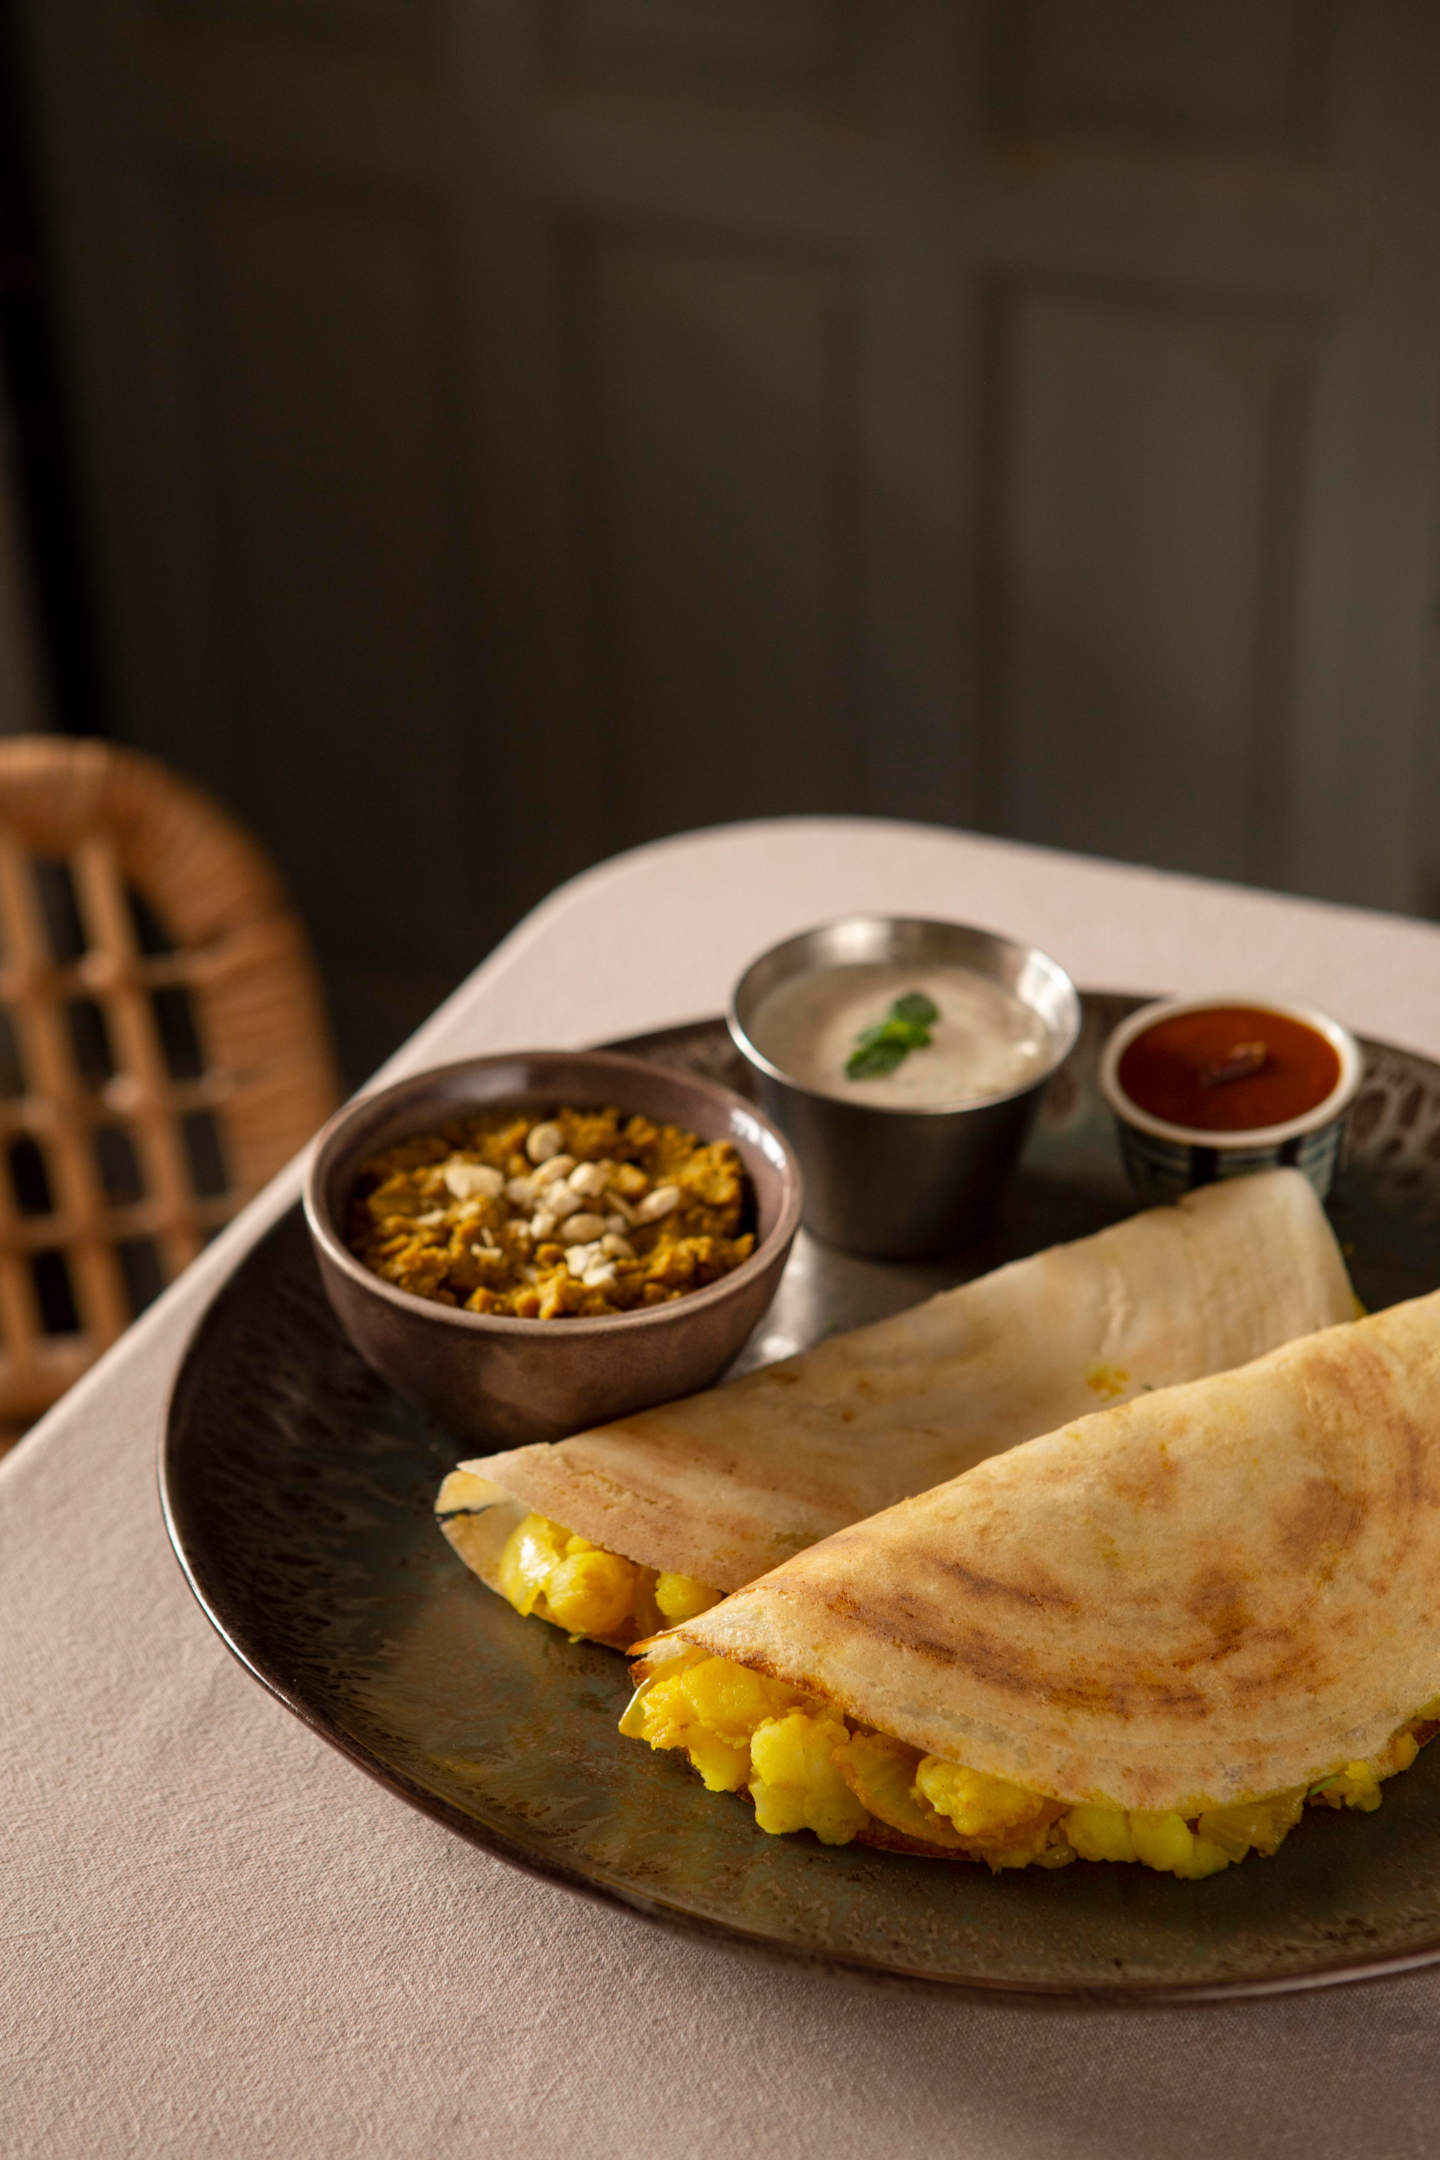 Masala dosa - Traditional South Indian dish served with flavorful spices.